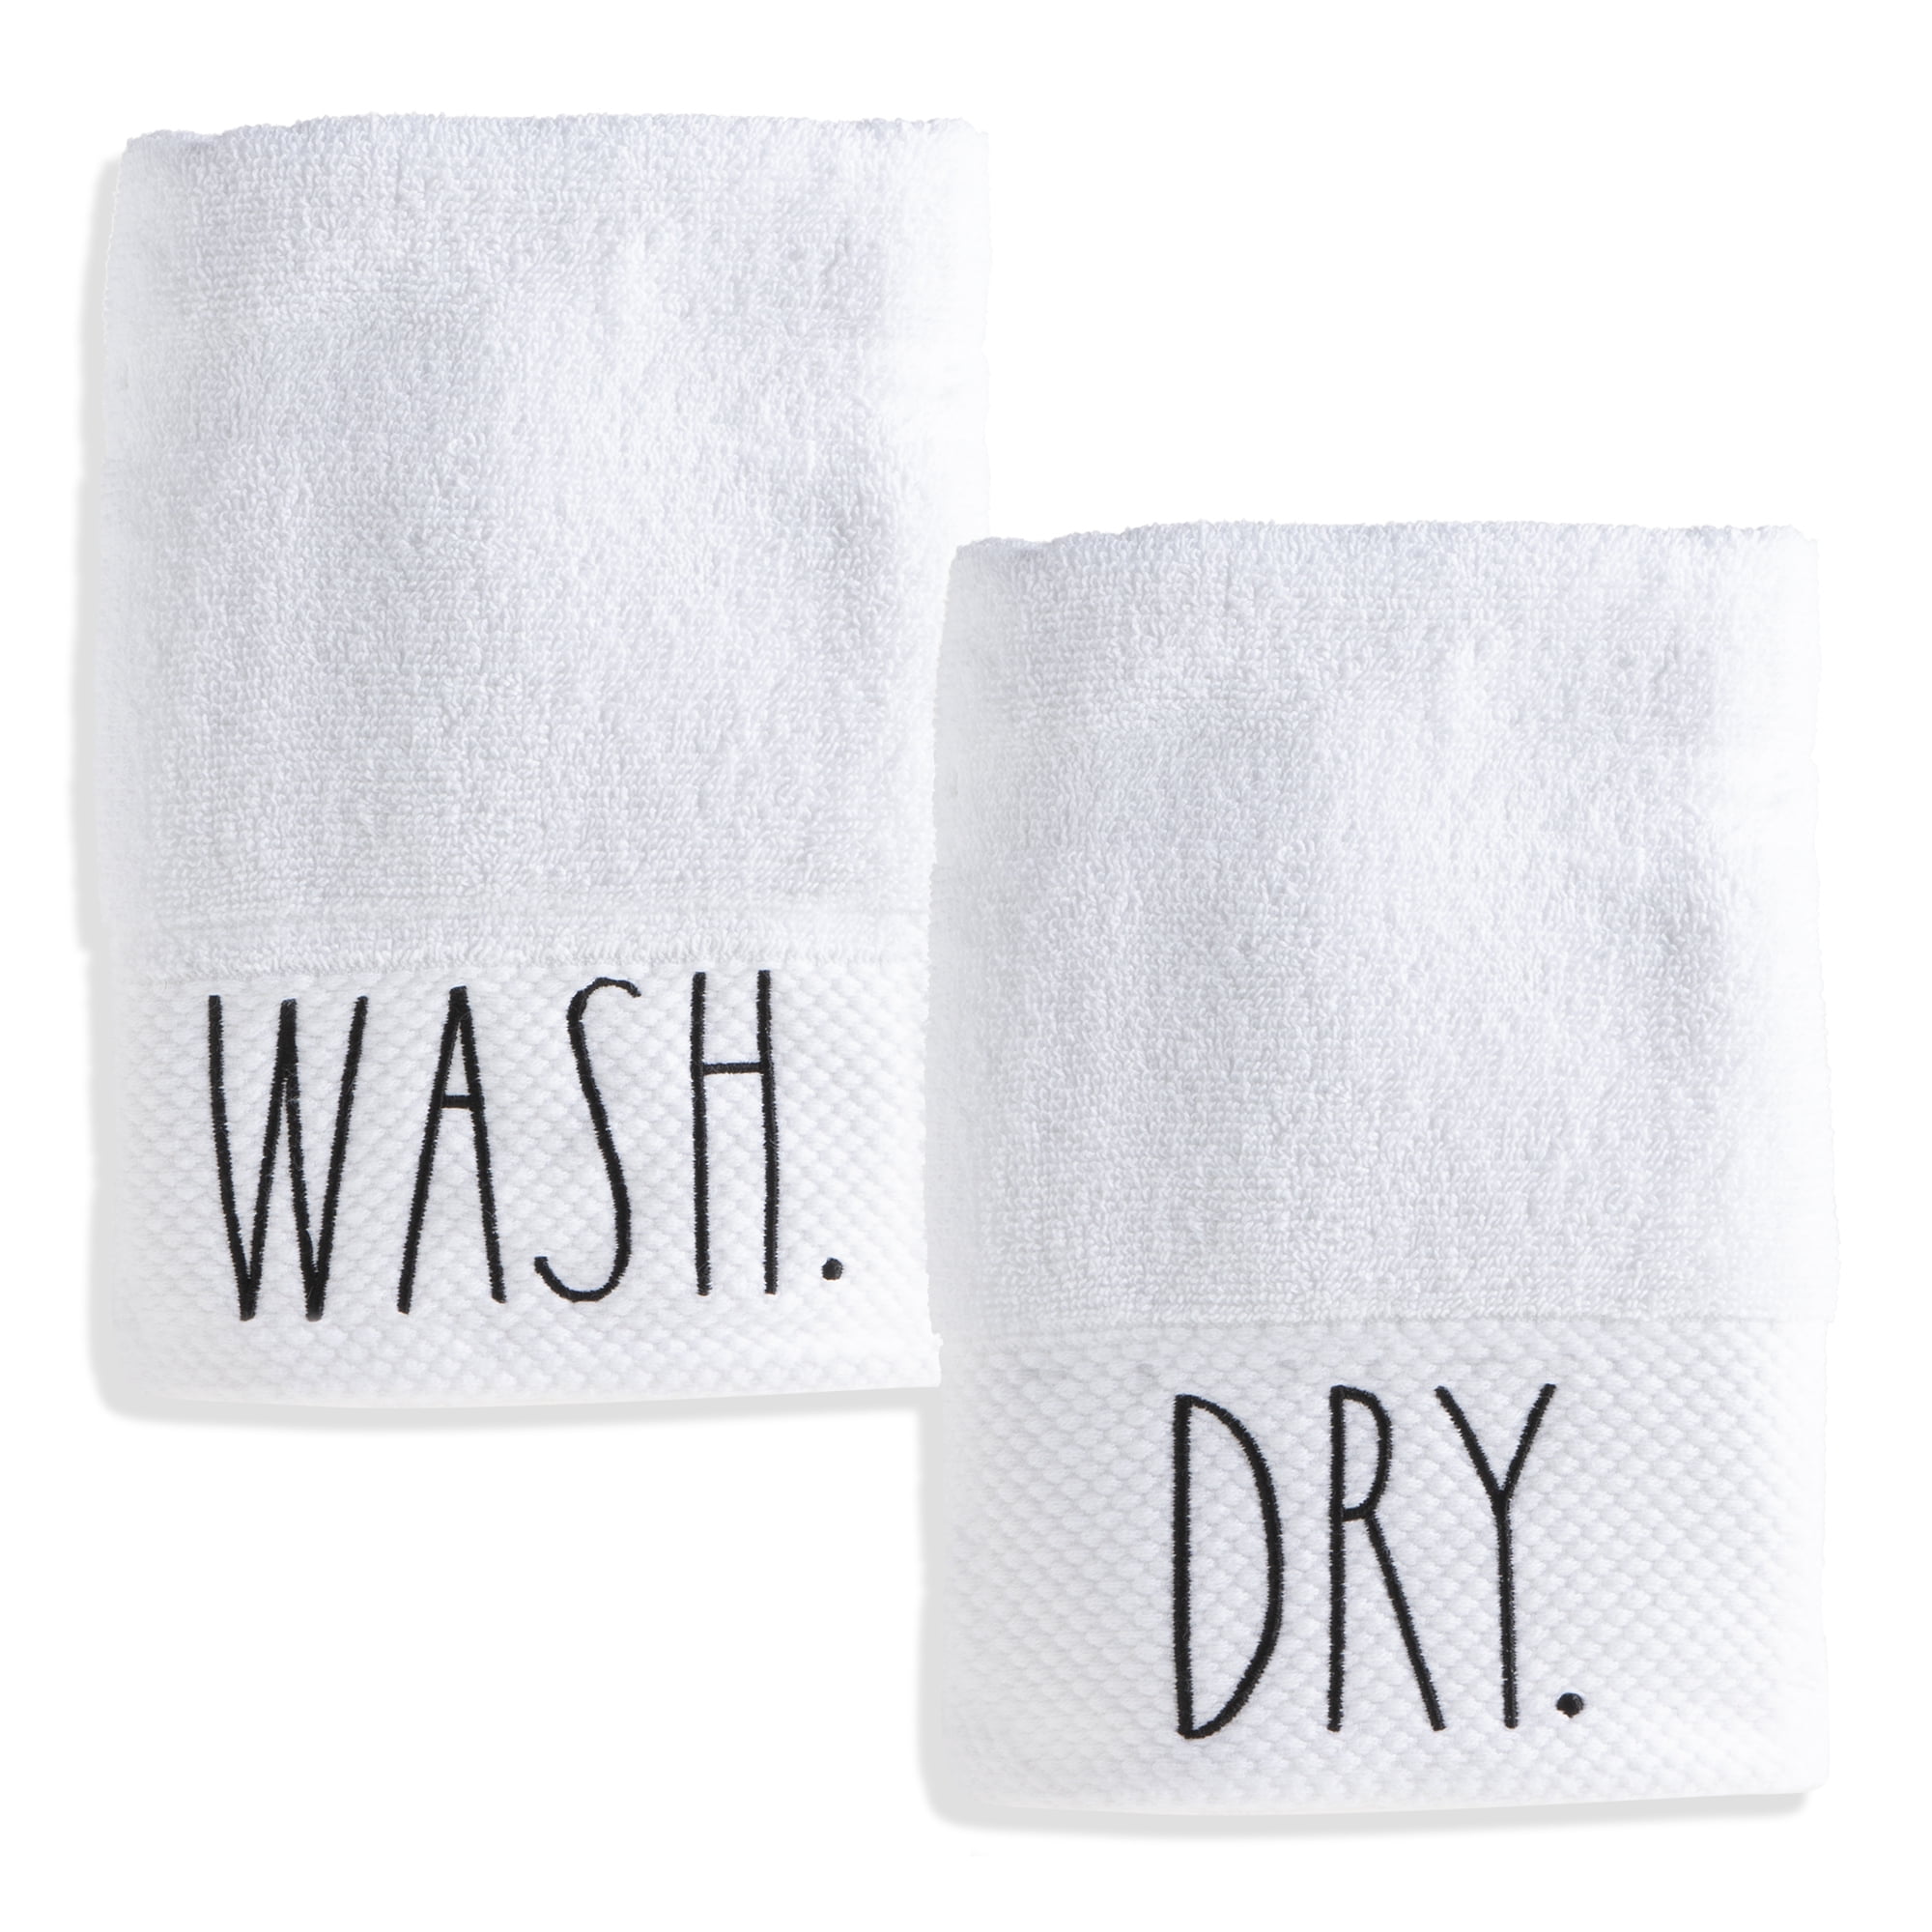 Rae Dunn Hand Towels, Embroidered Decorative Kitchen Towel for Kitchen and Bathroom, 100% Cotton, Highly Absorbent, 2 Pack, 16x2